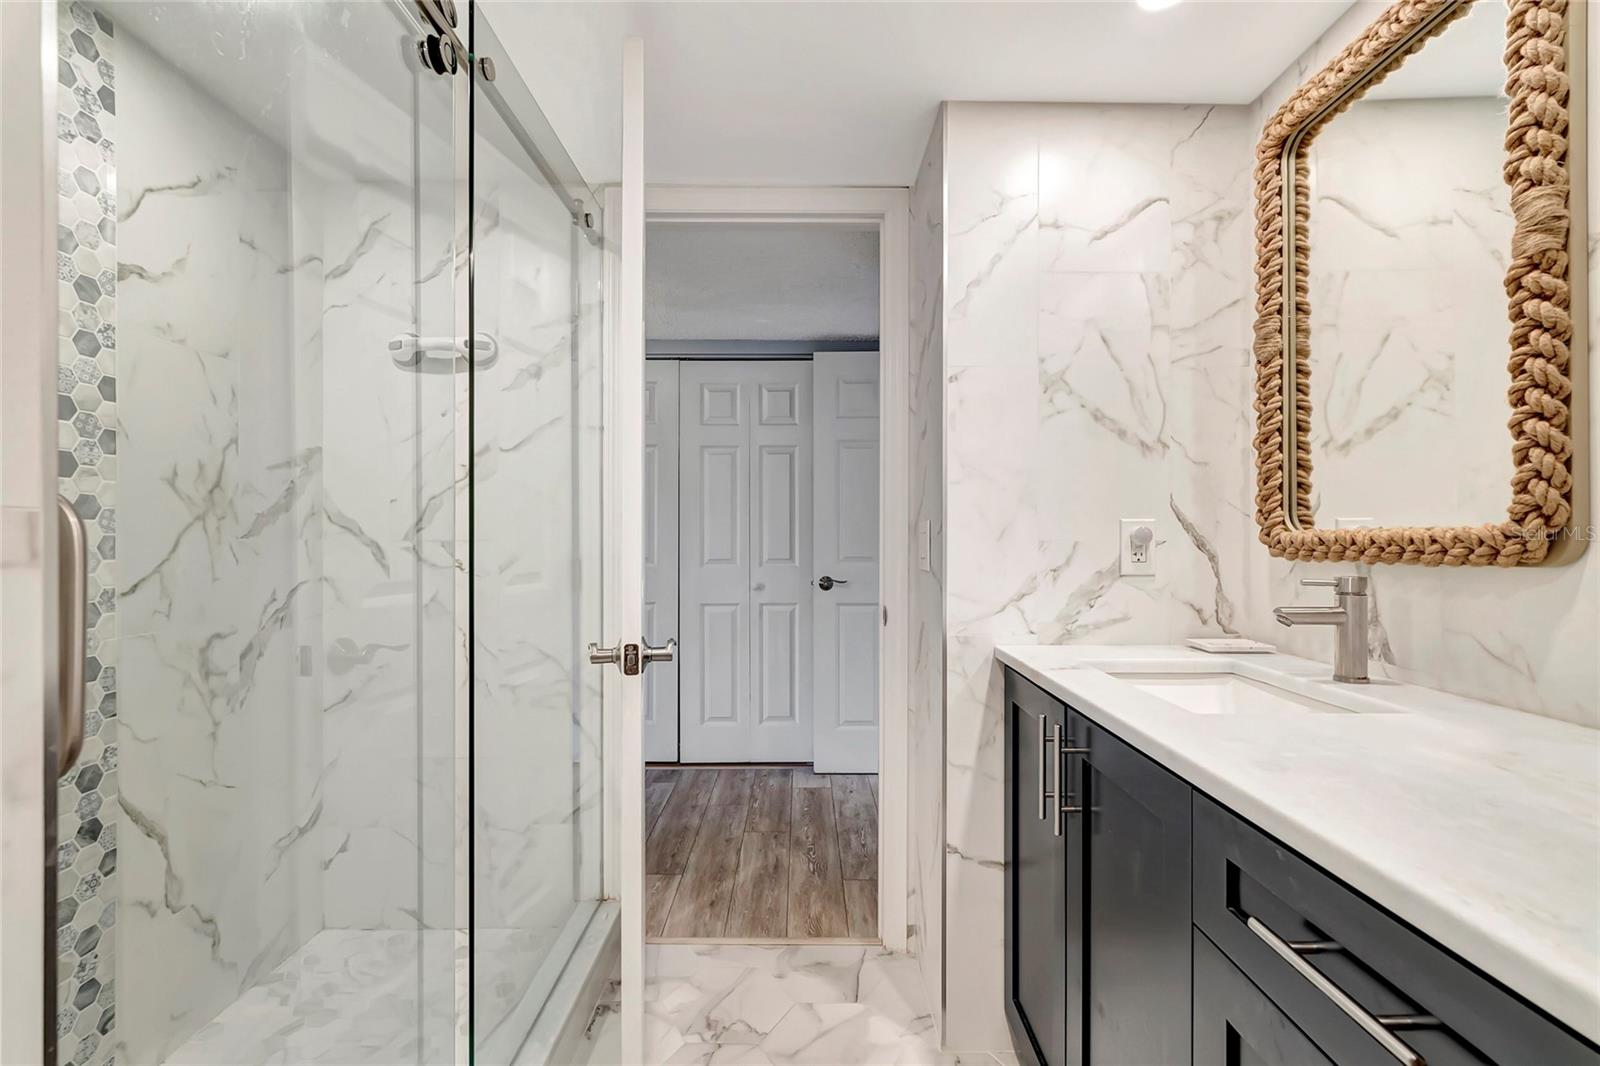 Featuring a spacious shower, sleek sink, and ample cabinets, this space combines practicality with style for your daily routine.